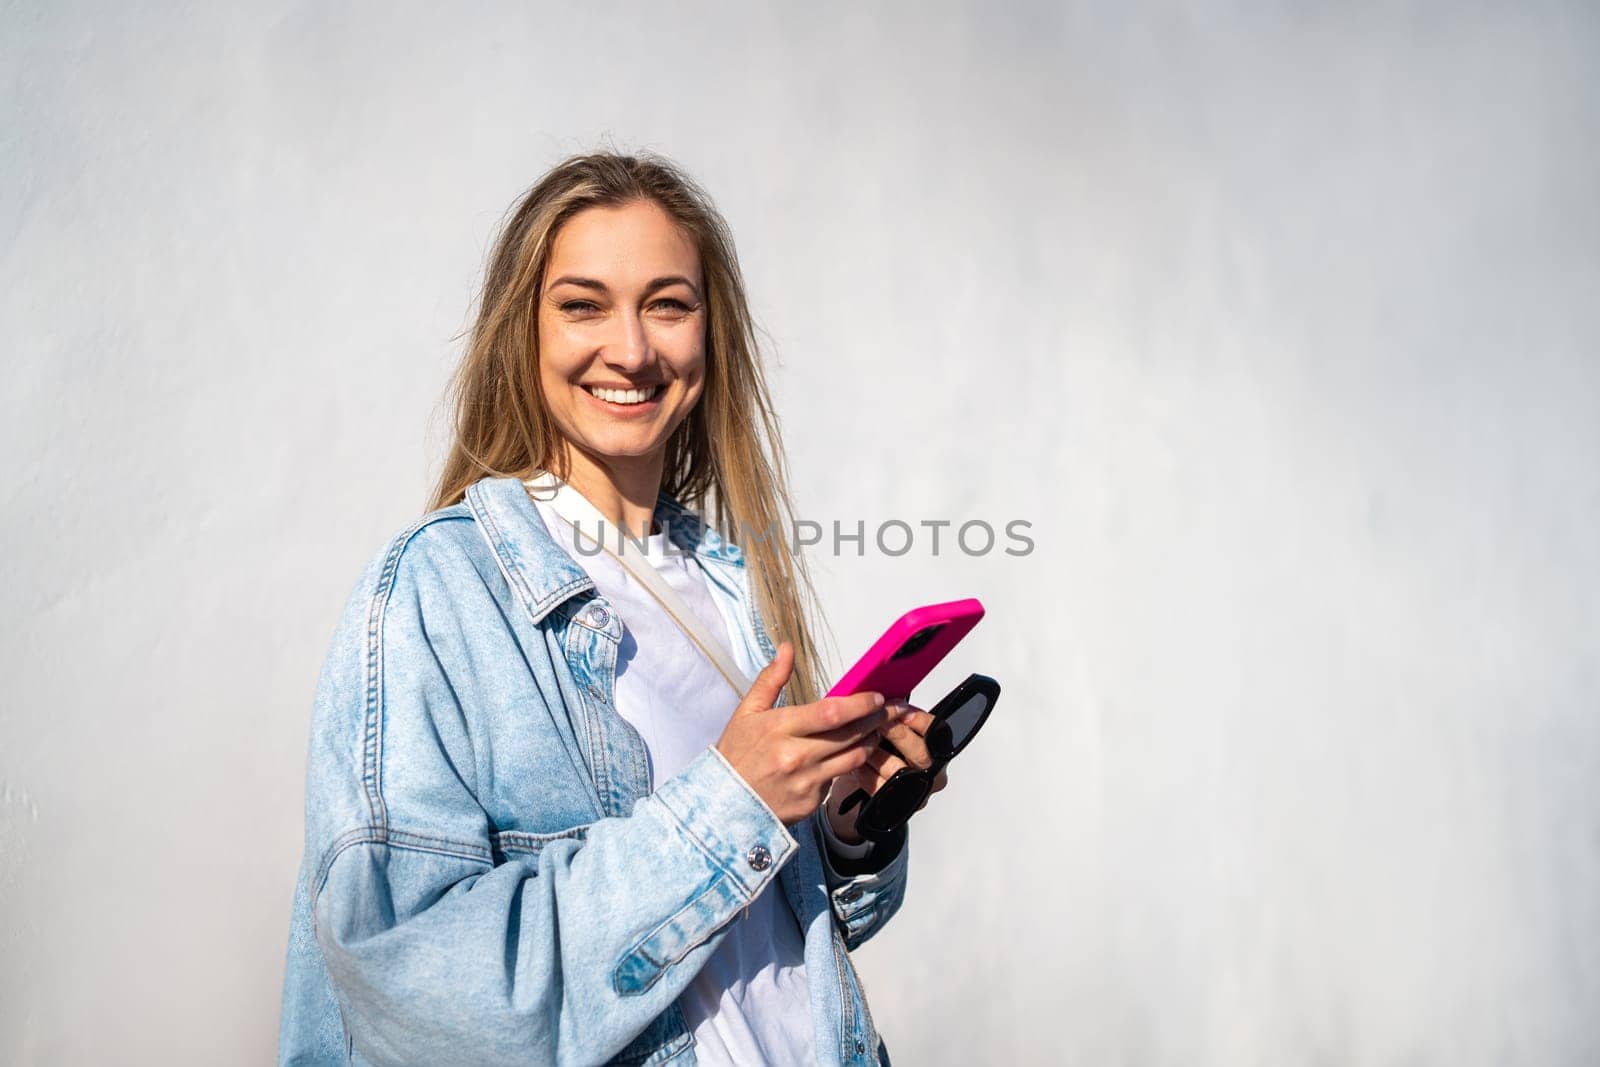 Portrait of cheerful young woman in denim shirt holding smartphone and looking at camera. Smiling female tourist standing against white wall on sunny day.